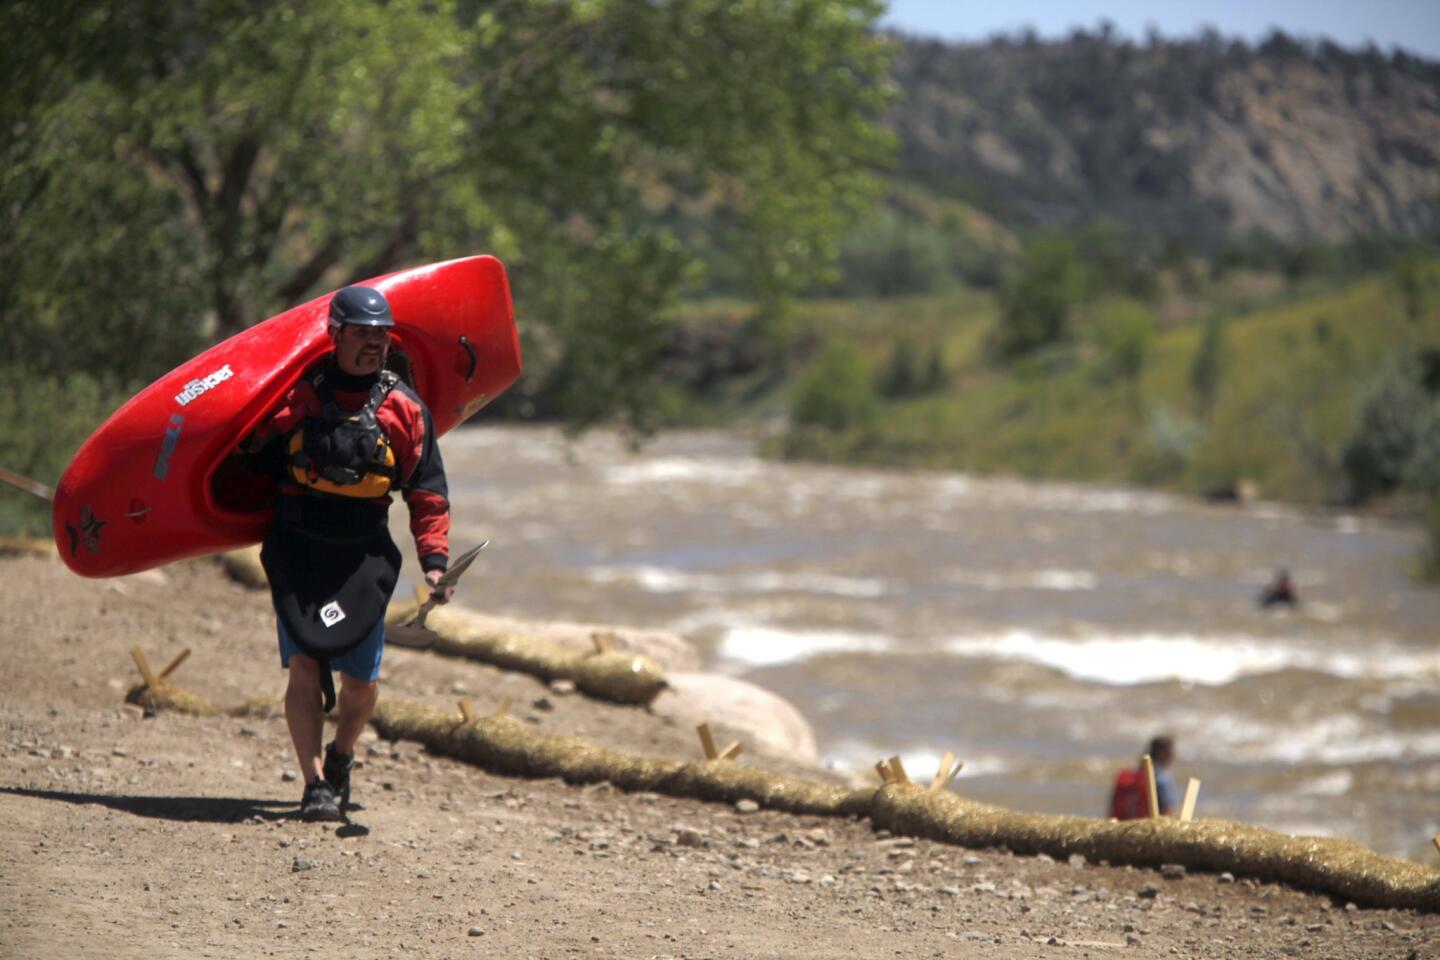 Water sports on the Animas River